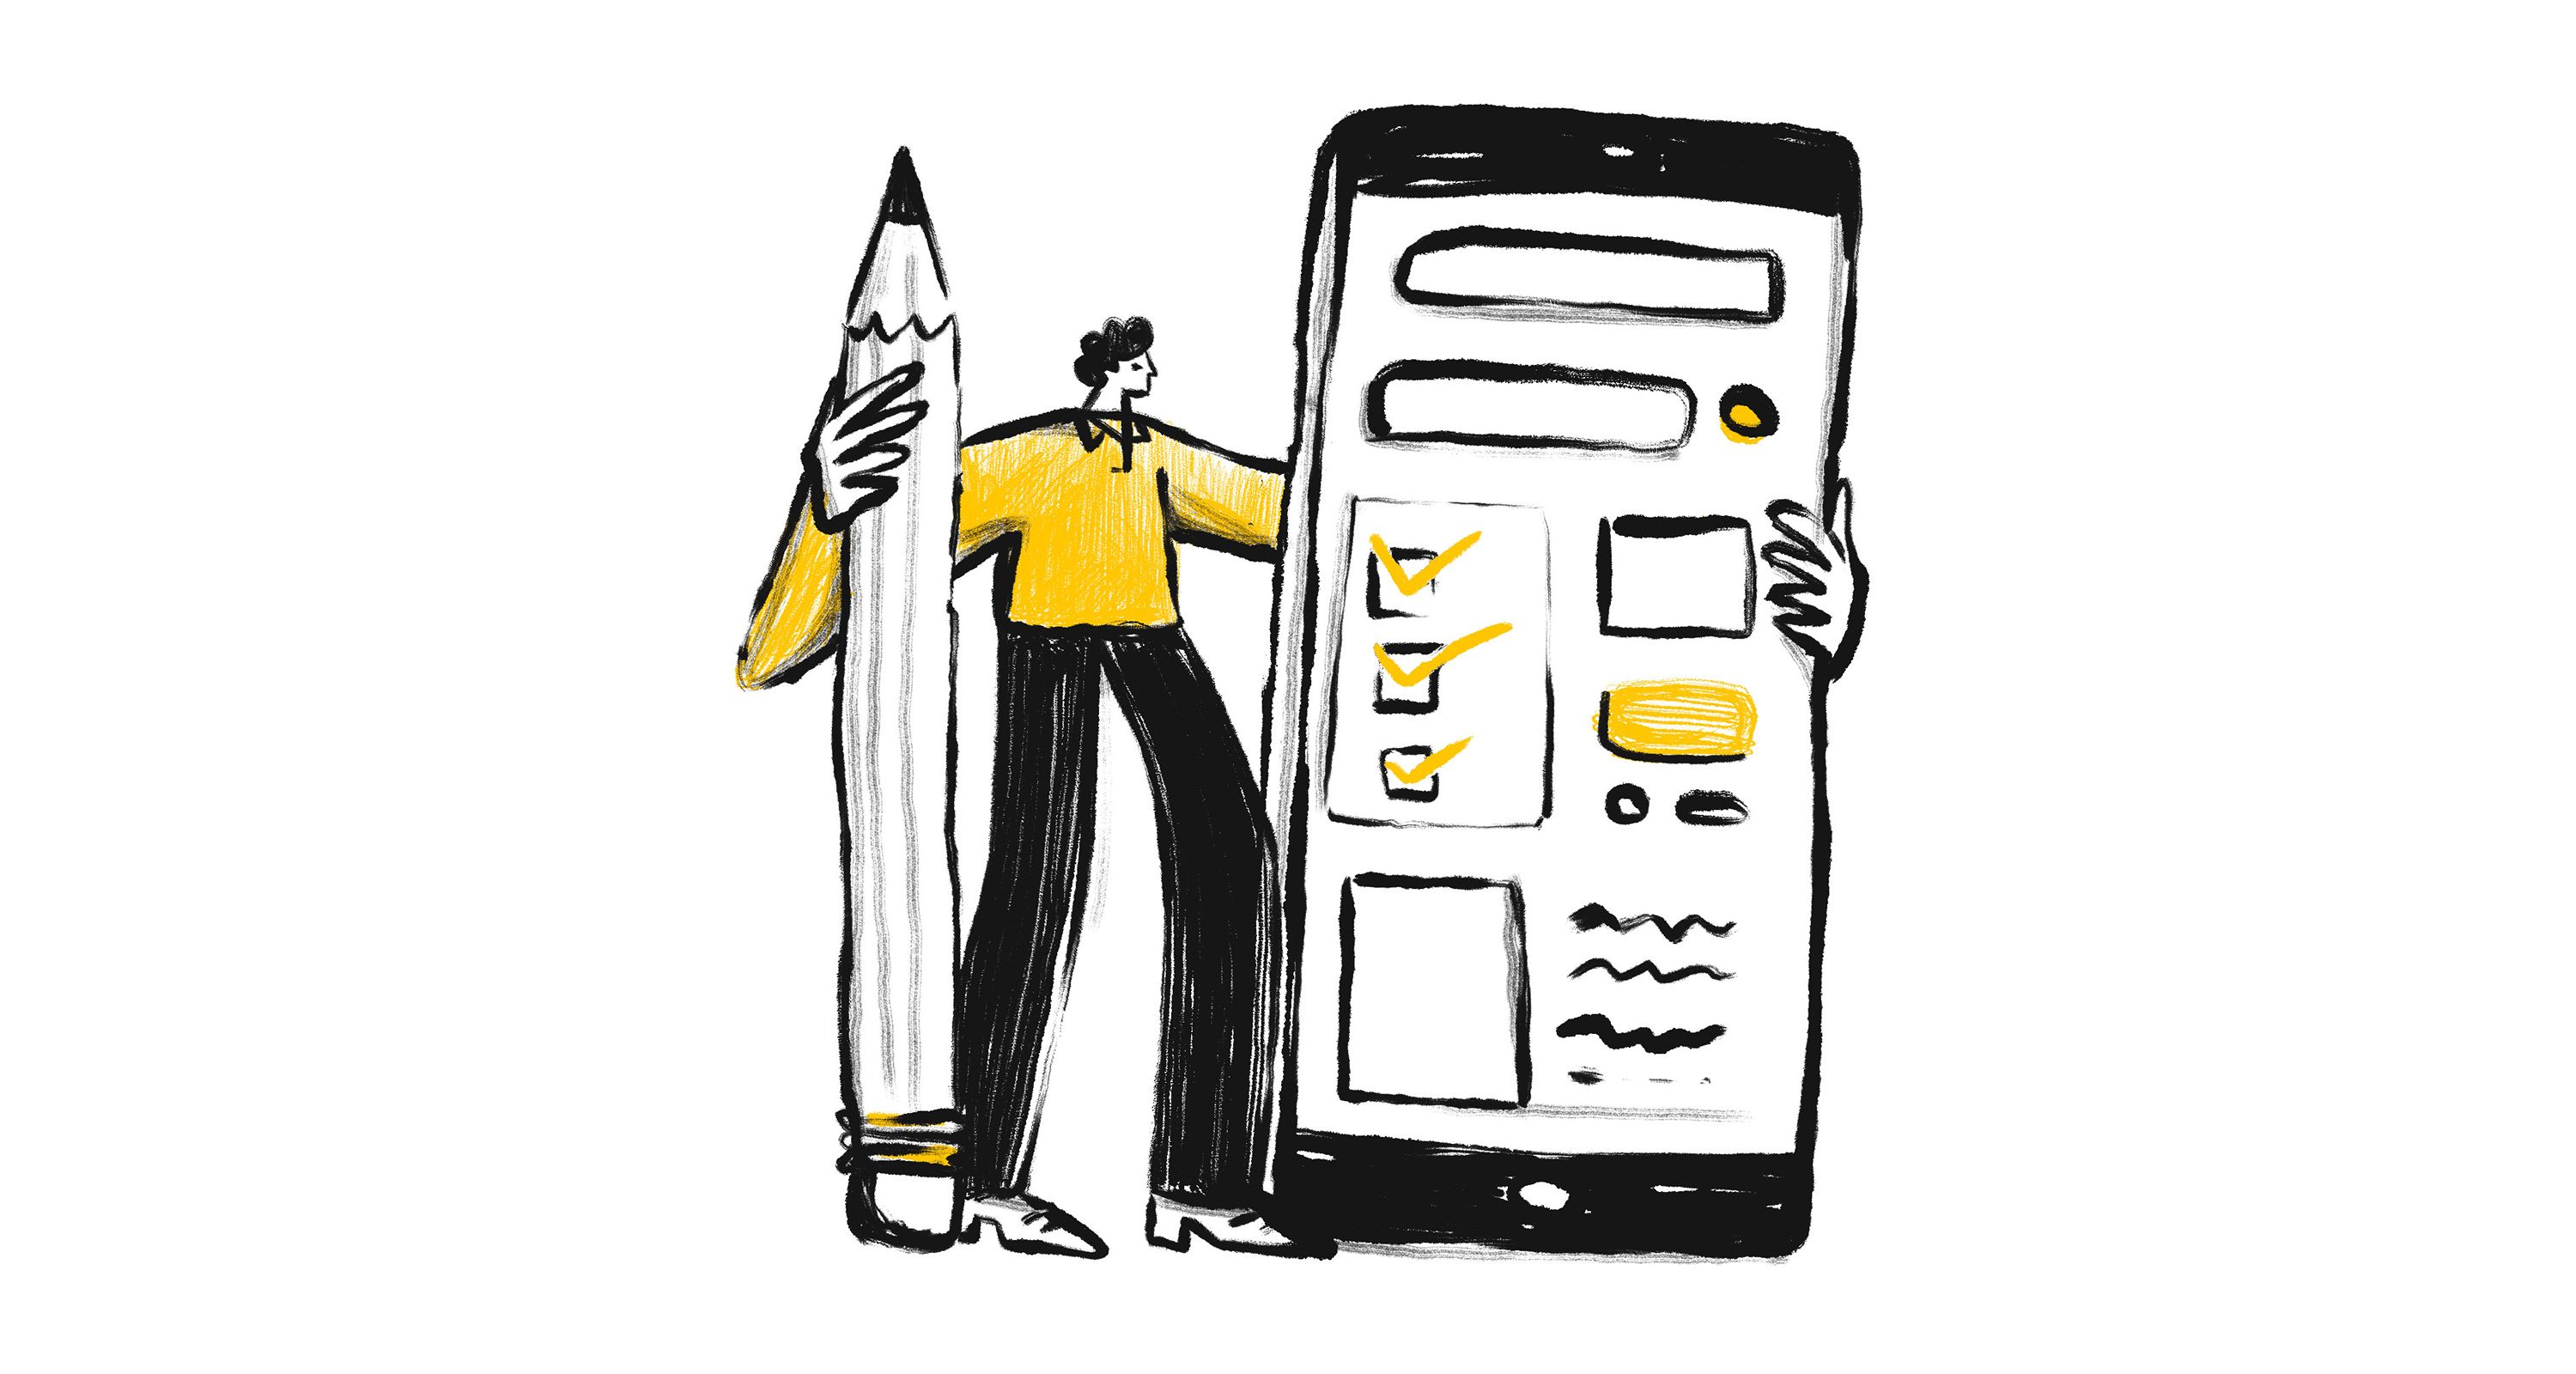 conceptual illustration of a man holding a giant pencil on the right hand and a giant celphone on the left. Depict the idea of creating apps